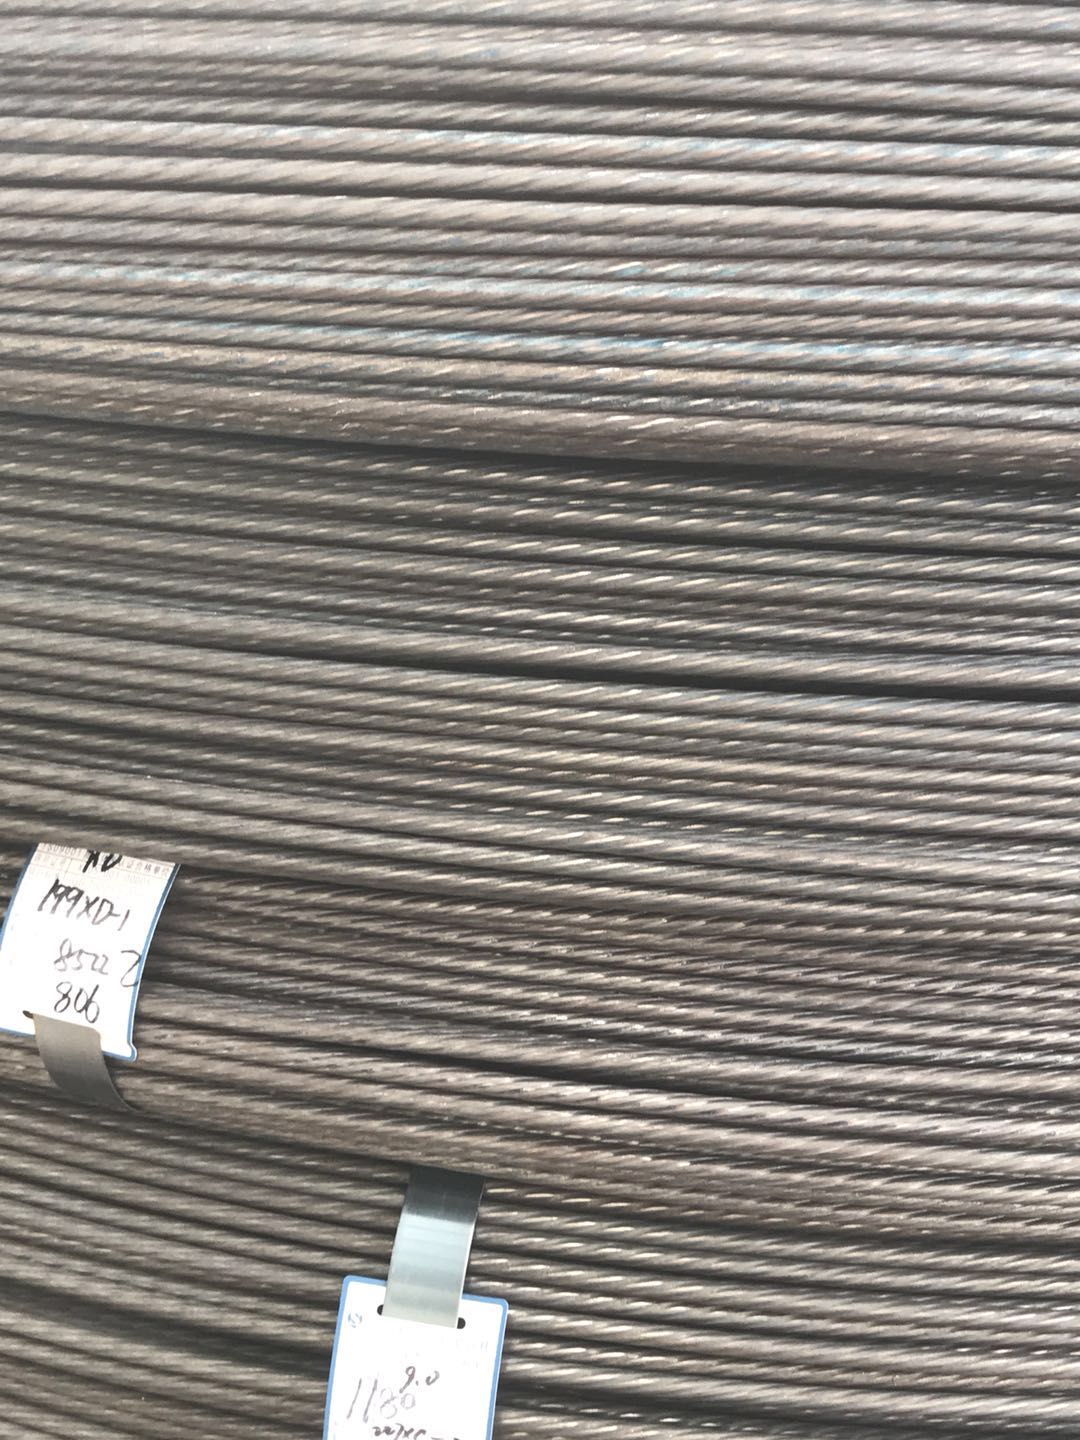 5mm PC STEEL WIRE WITH SPIRAL RIBBED ON SURFACE